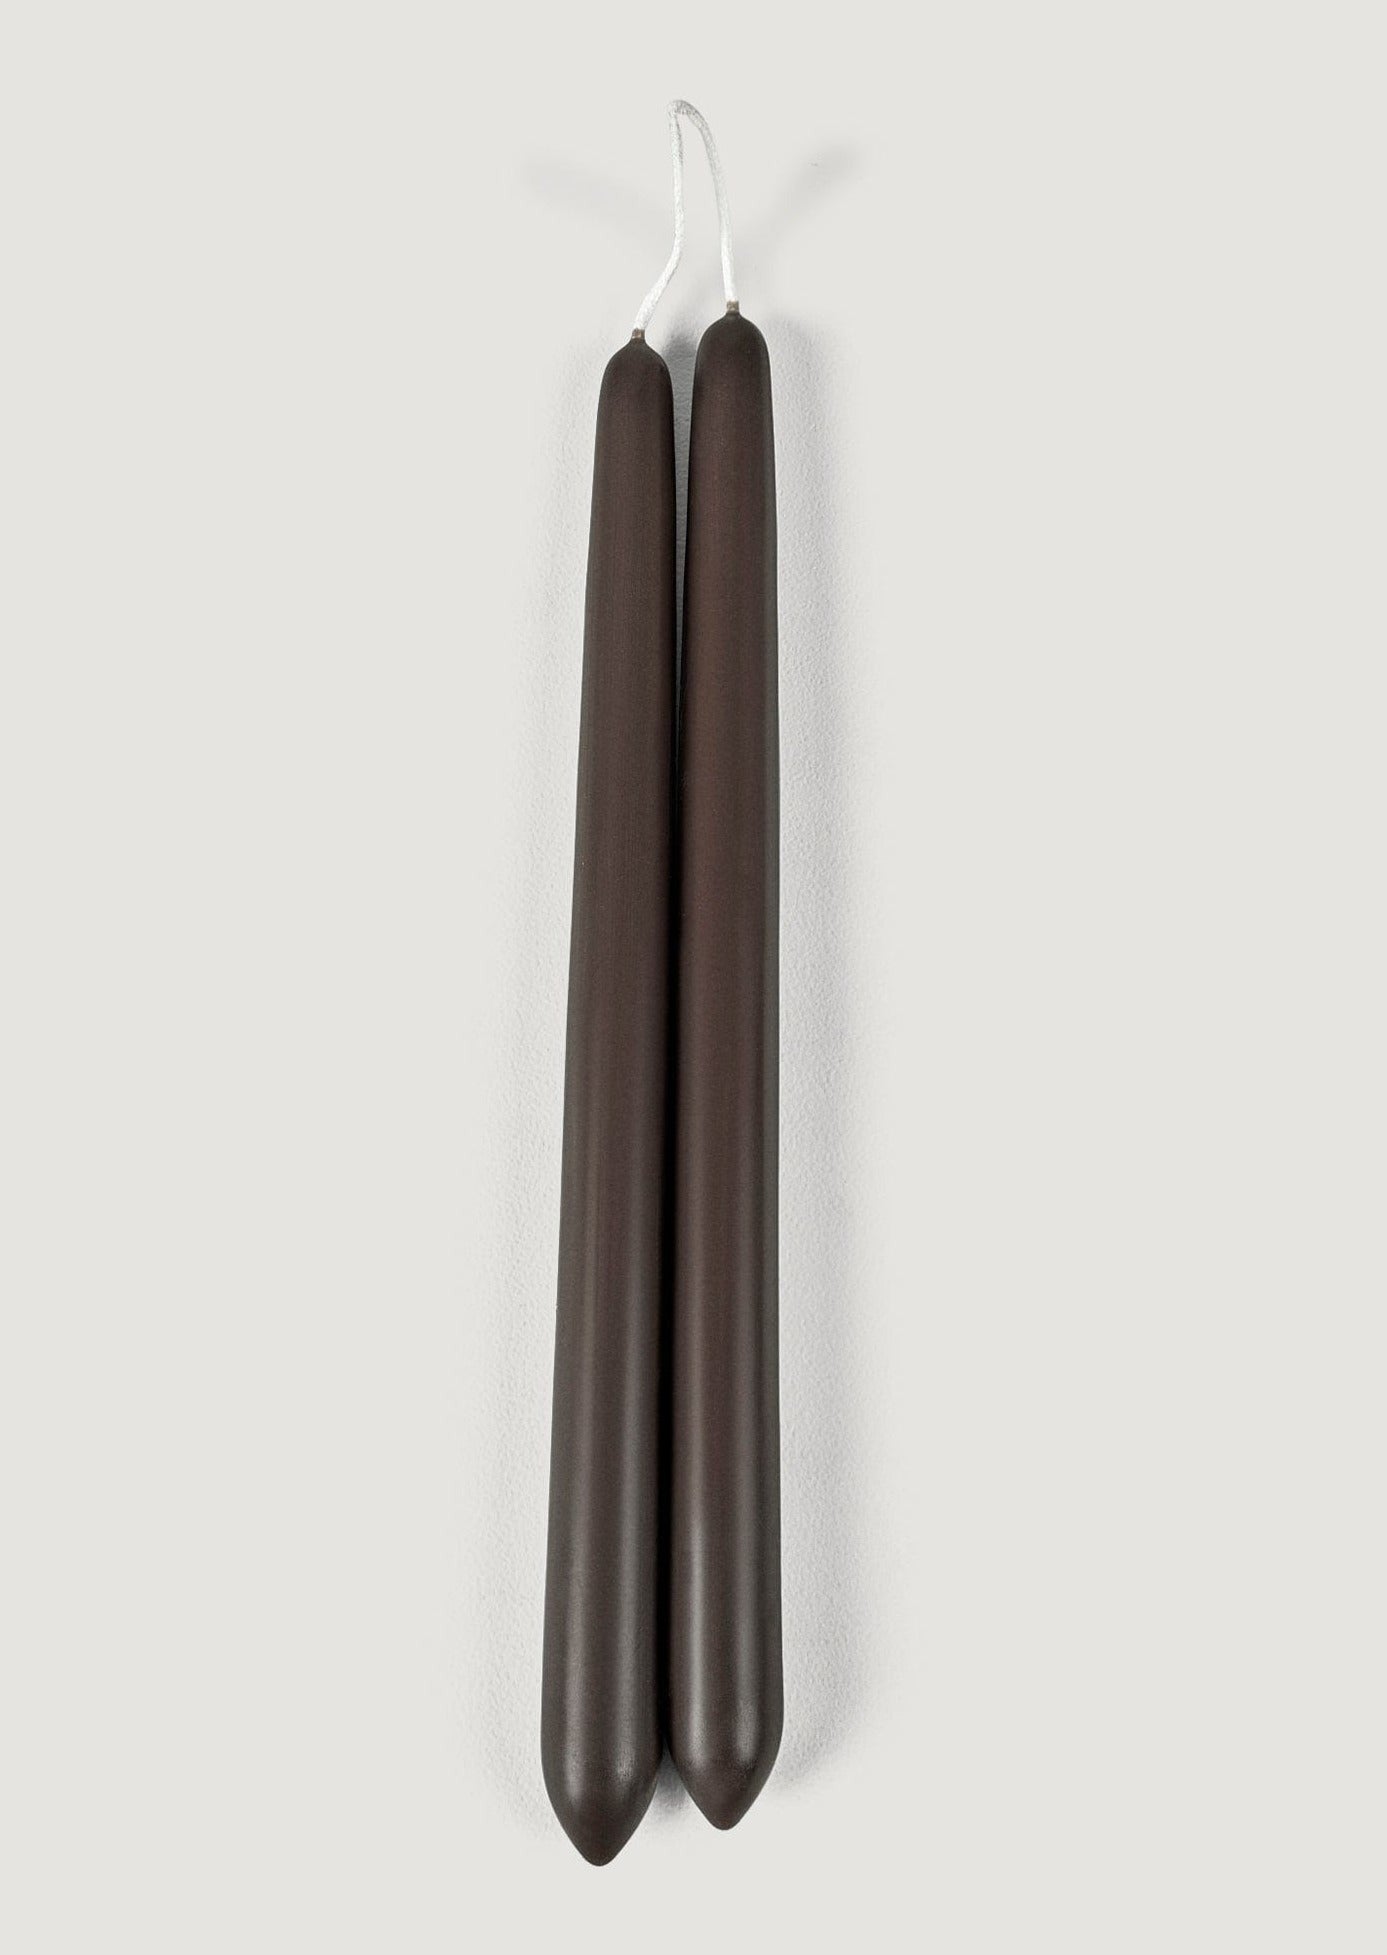 Beeswax Taper Candles in Chestnut at Afloral